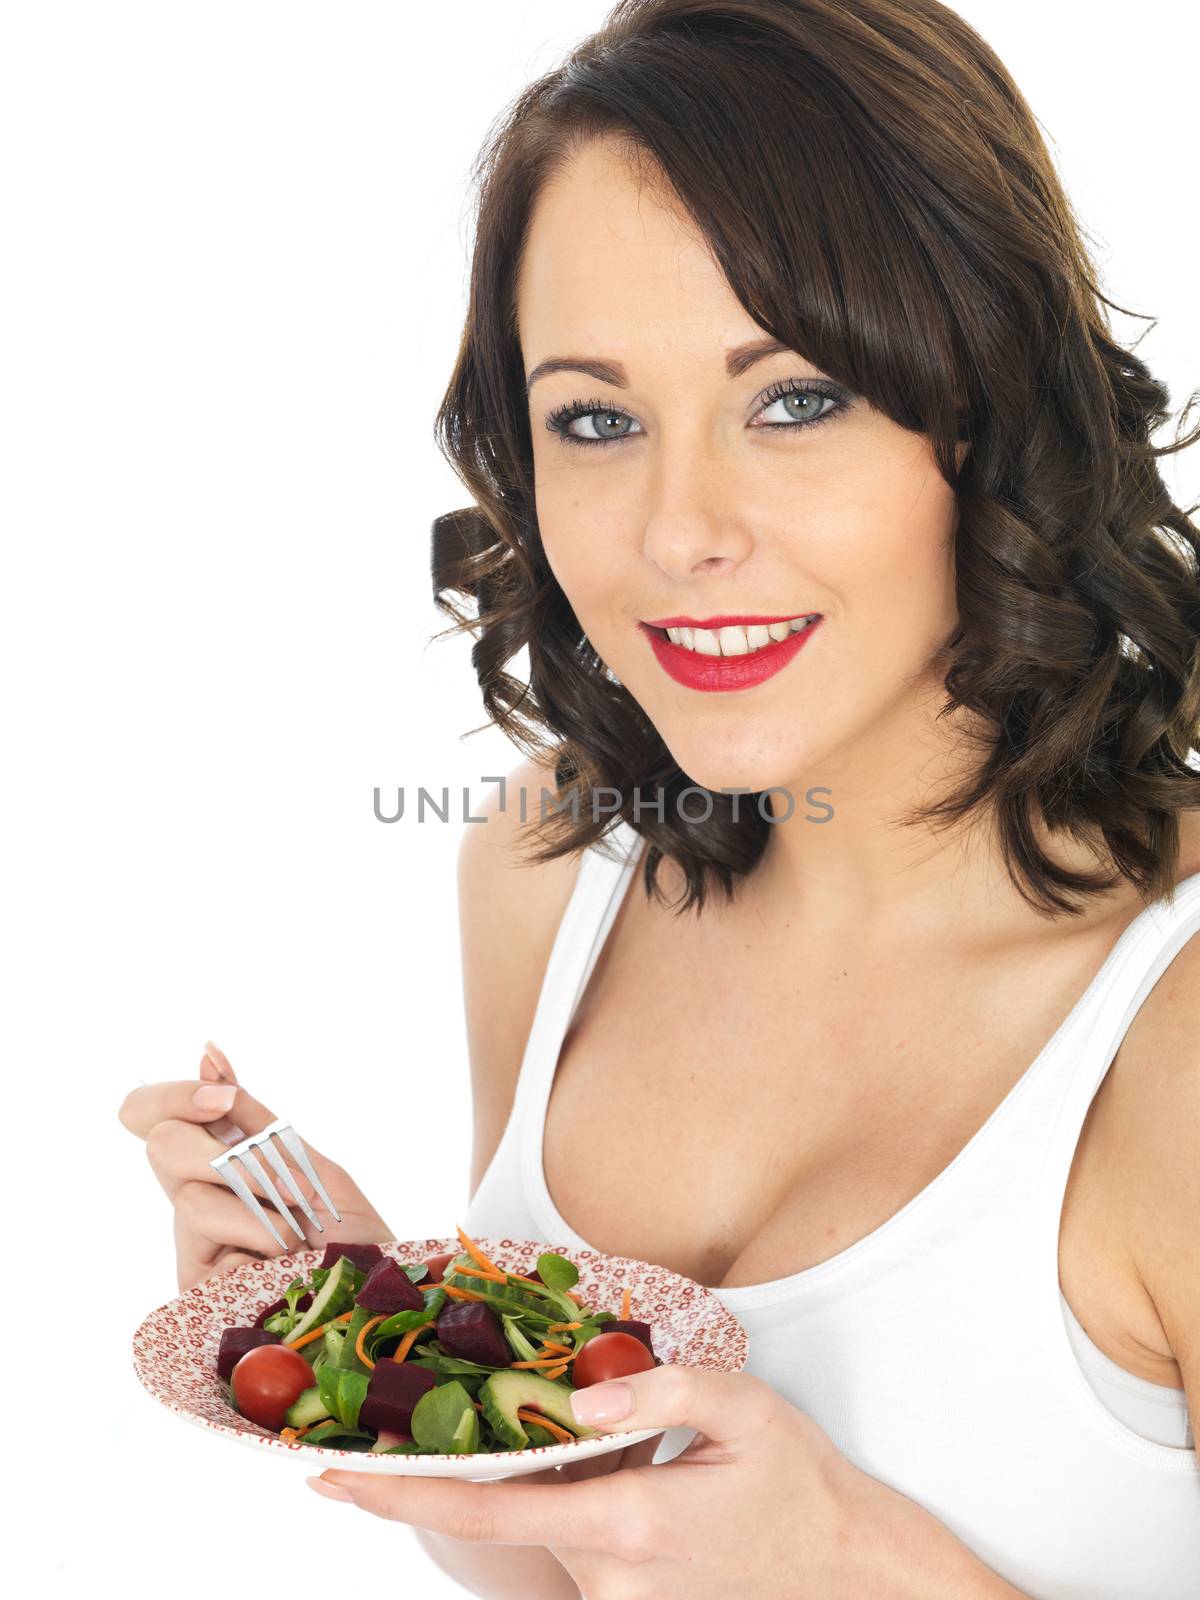 Young Woman Eating Salad by Whiteboxmedia